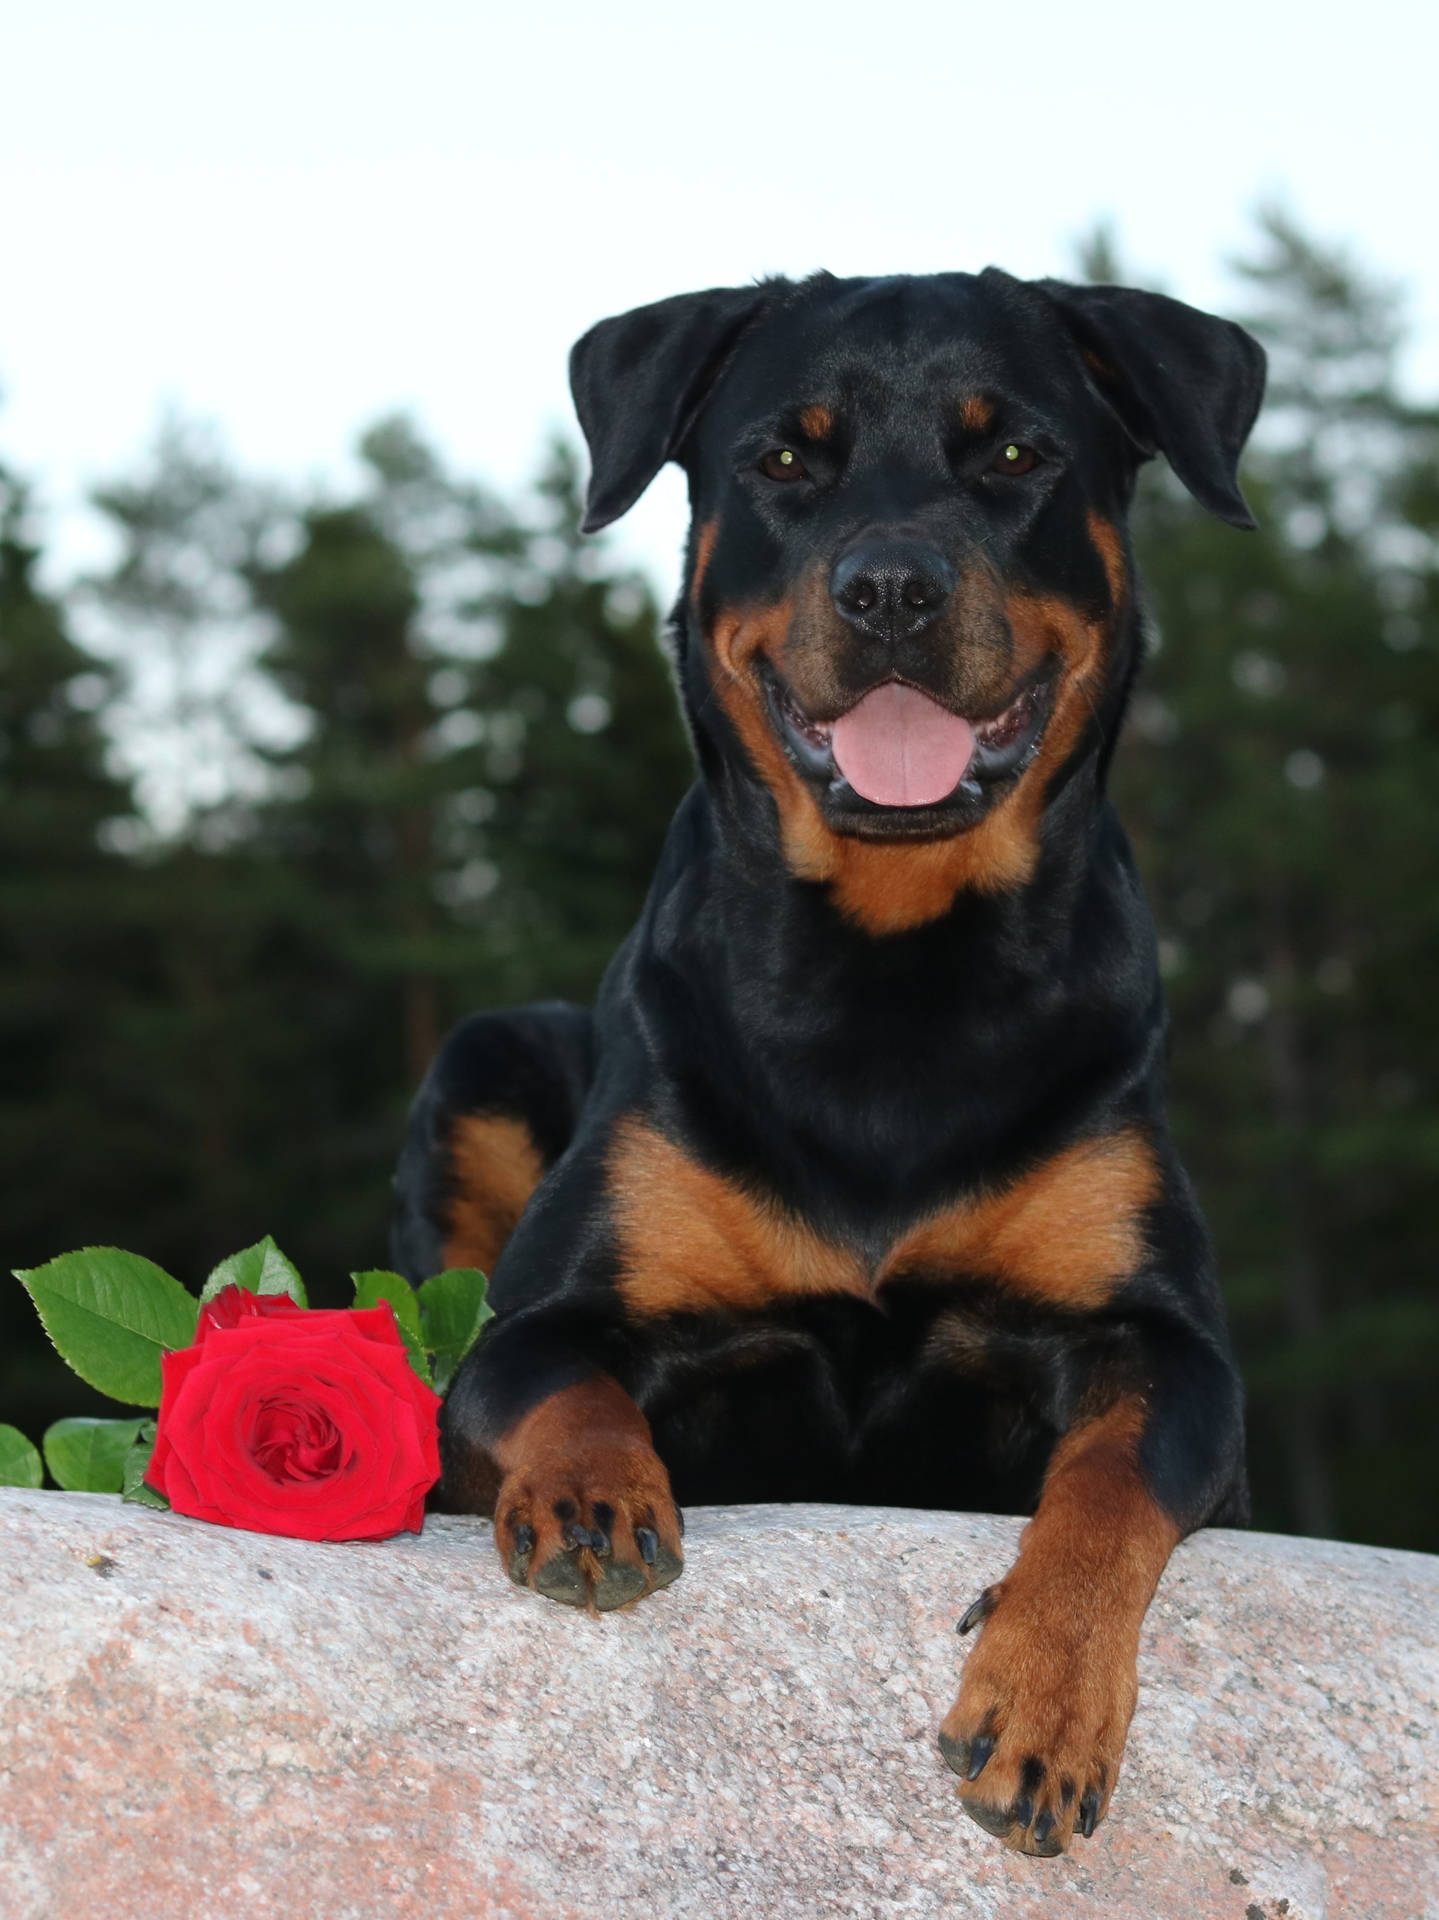 Romantic Rottweiler Dog With Rose Wallpaper